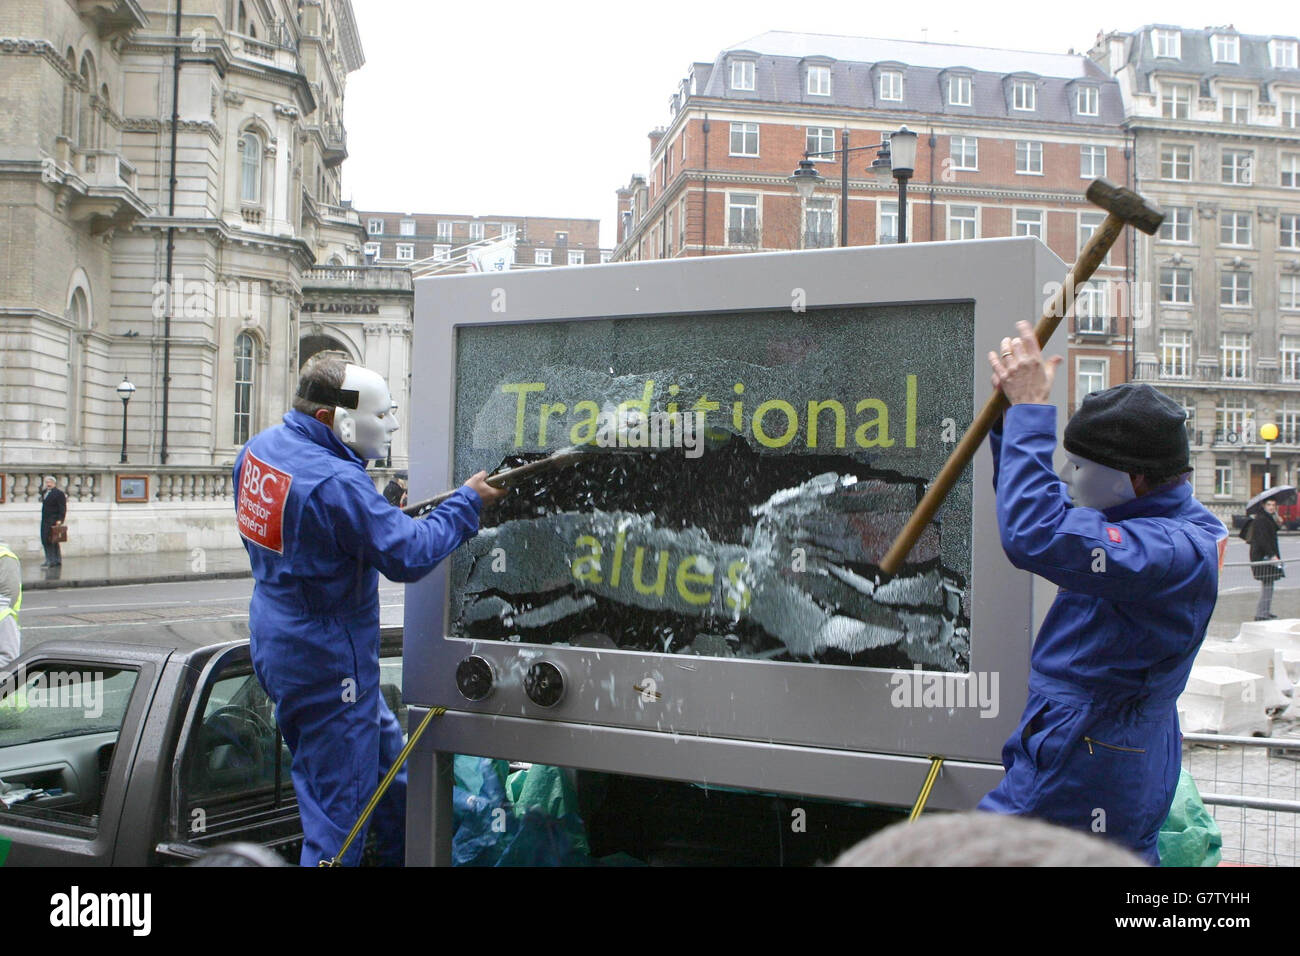 Demonstrators from the Christian Congress For Traditional Values symbolically destroy a TV in protest at the BBC's stand against traditional family values. Stock Photo